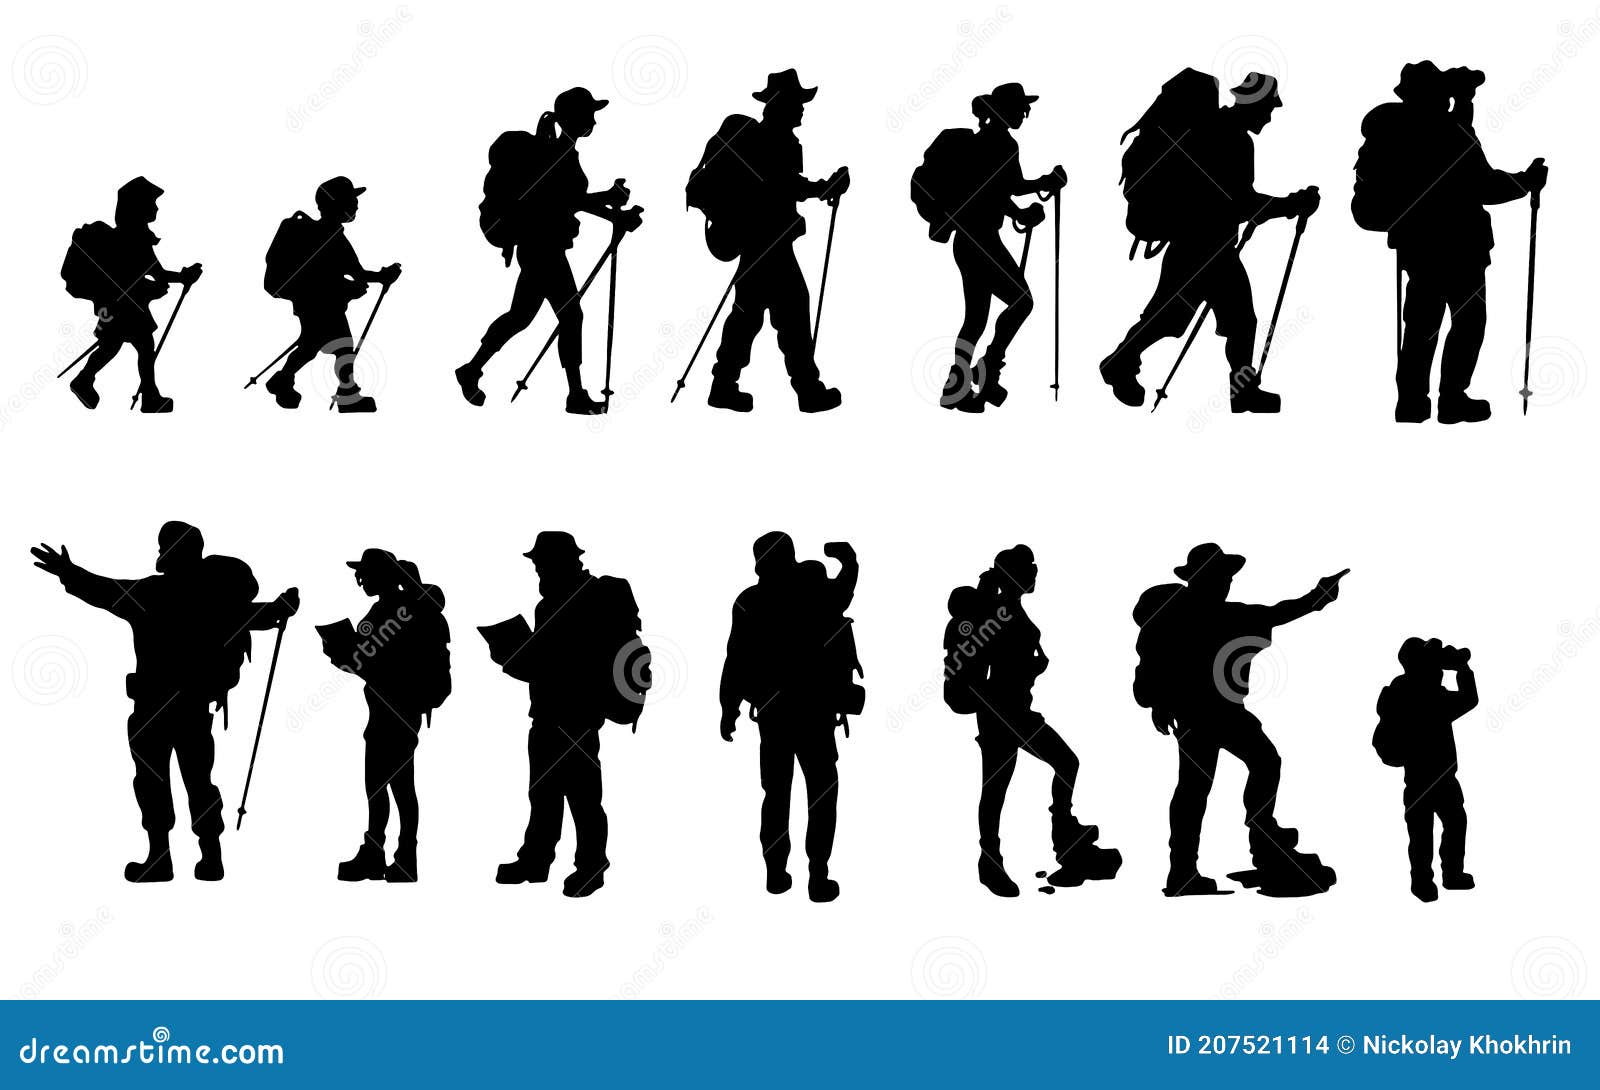 silhouettes of travelers with backpacks set. hiking, trekking, backpacking